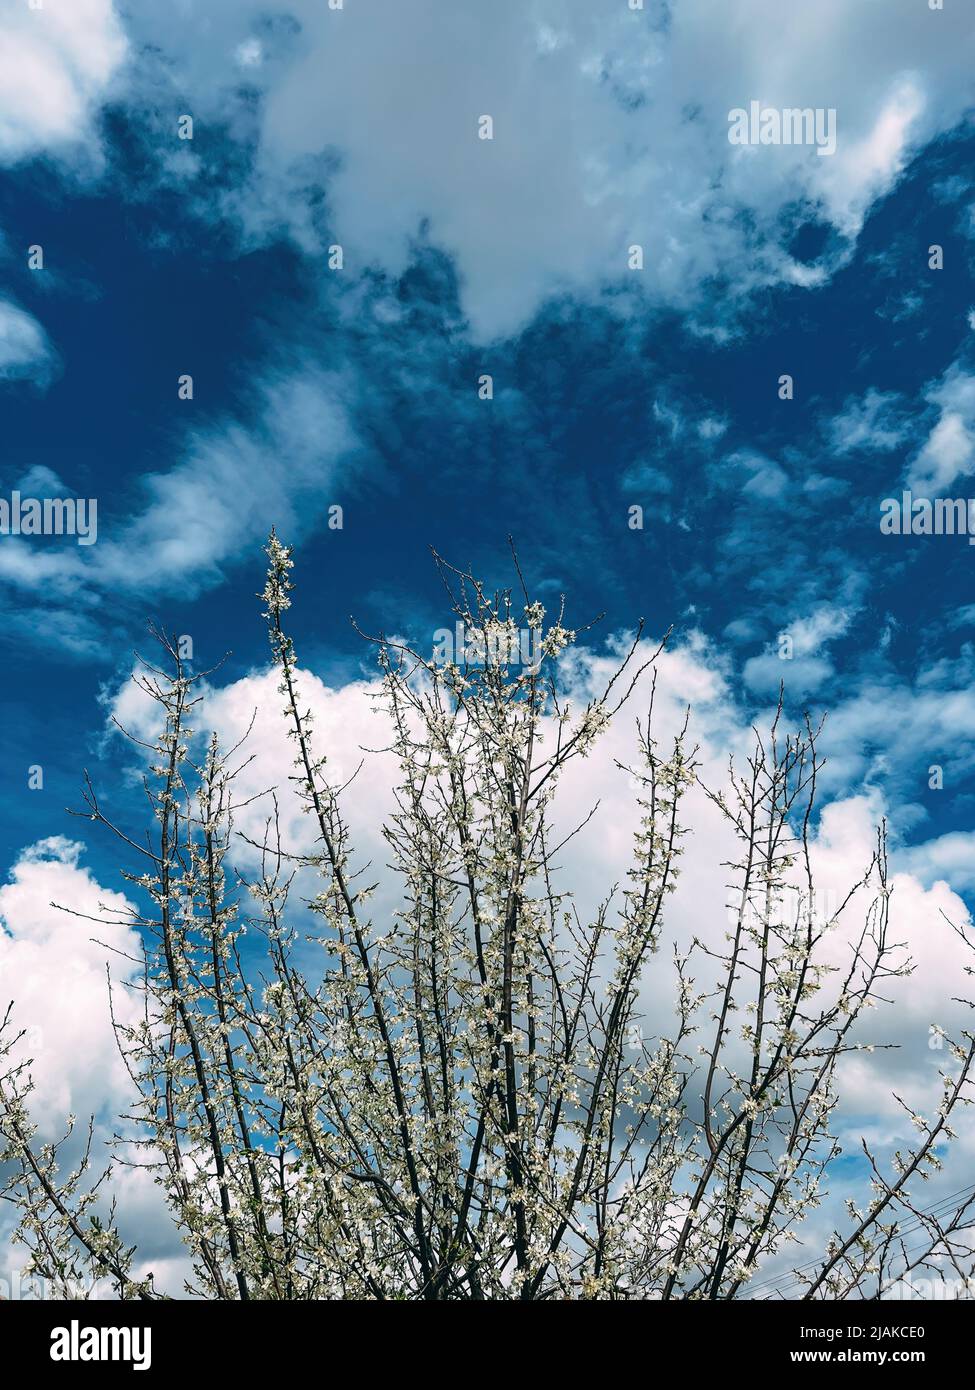 Blooming morus alba or white mulberry tree branches in orchard against blue sky Stock Photo